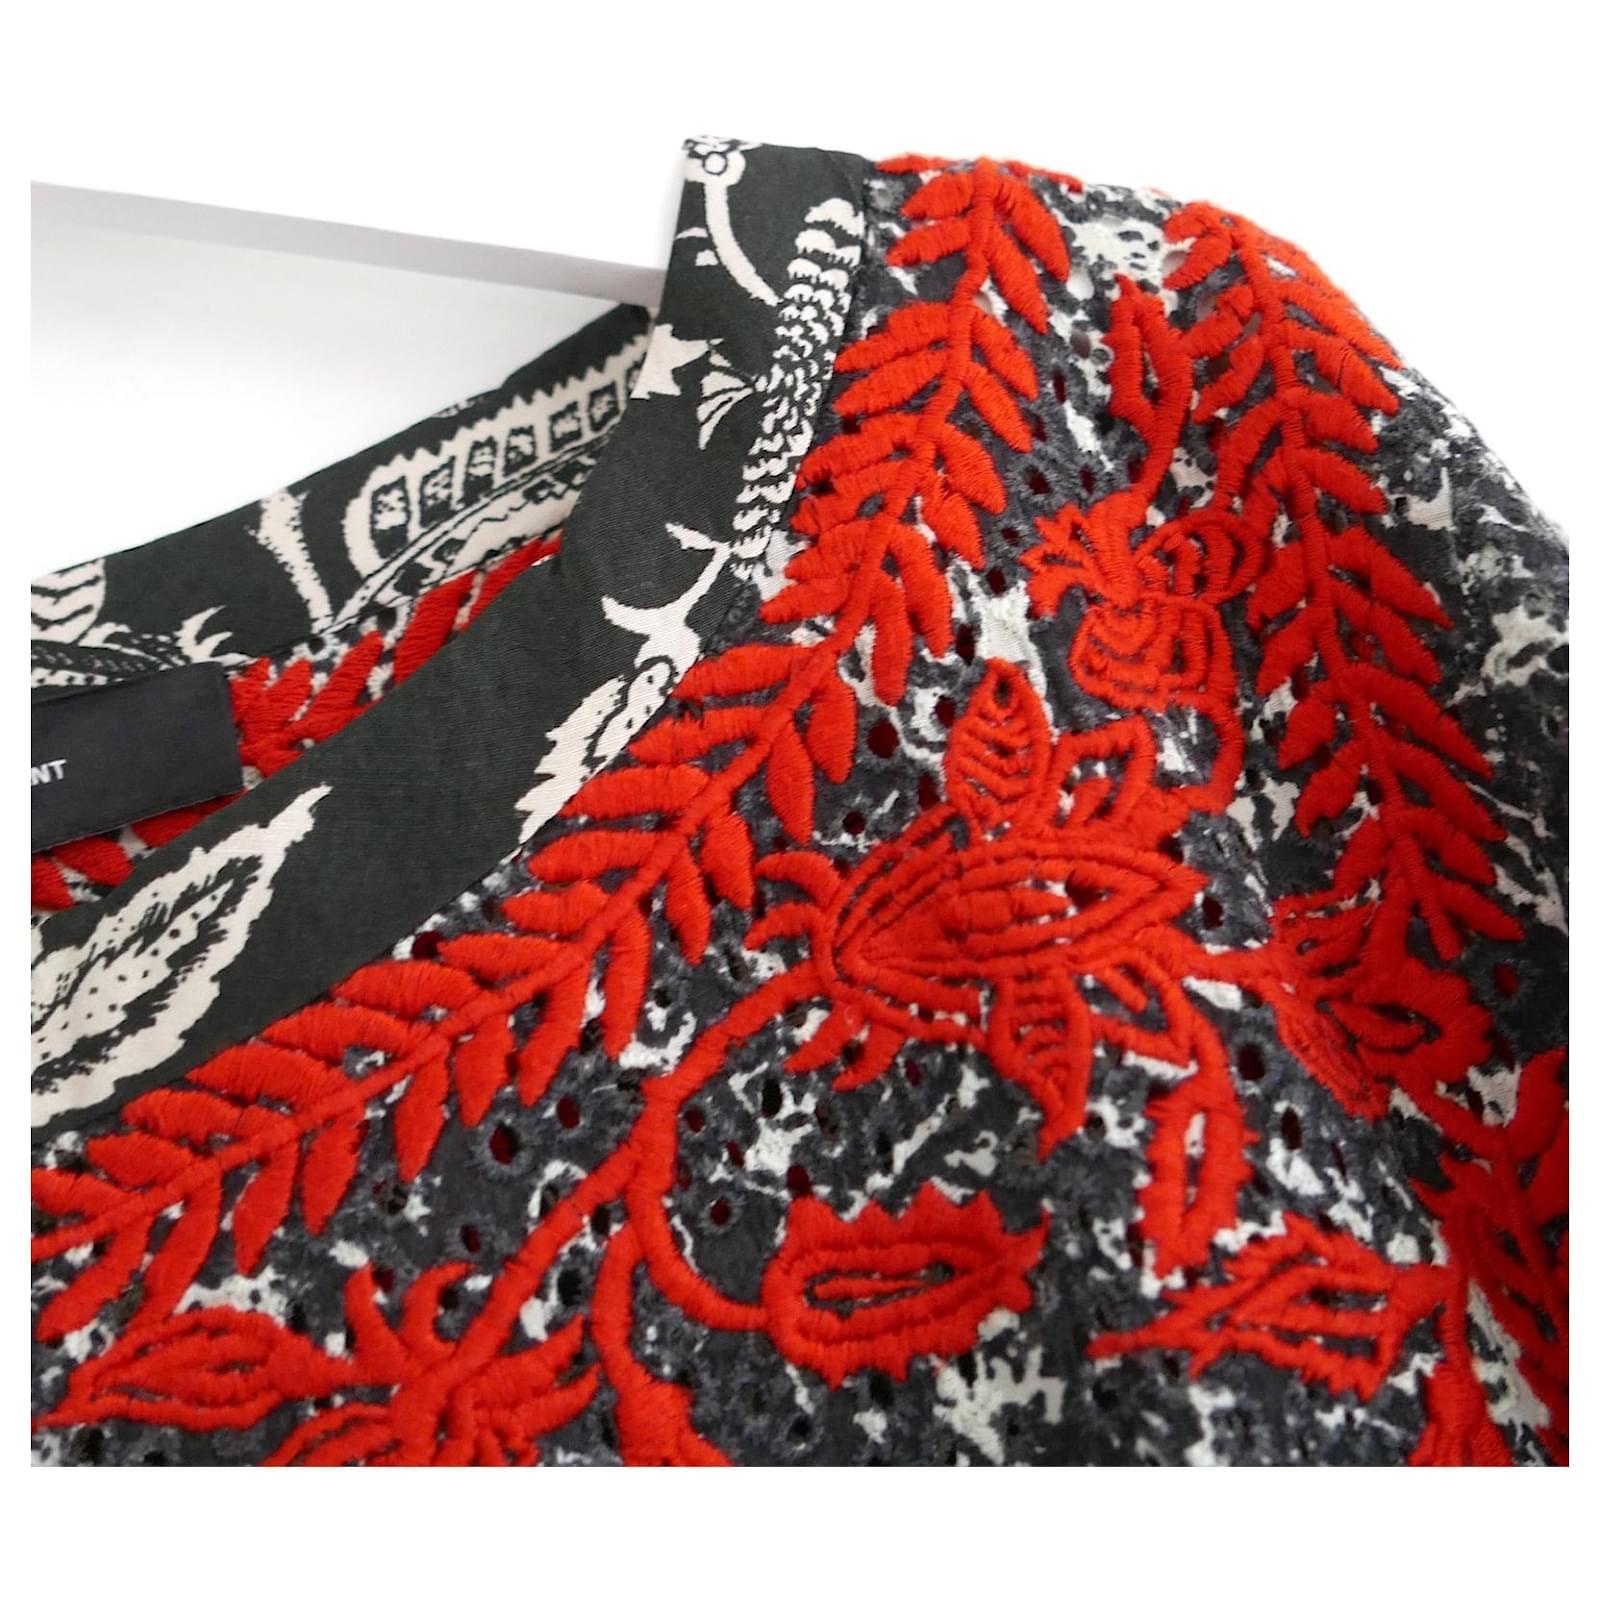 Women's Isabel Marant SS13 Embroidered Top For Sale